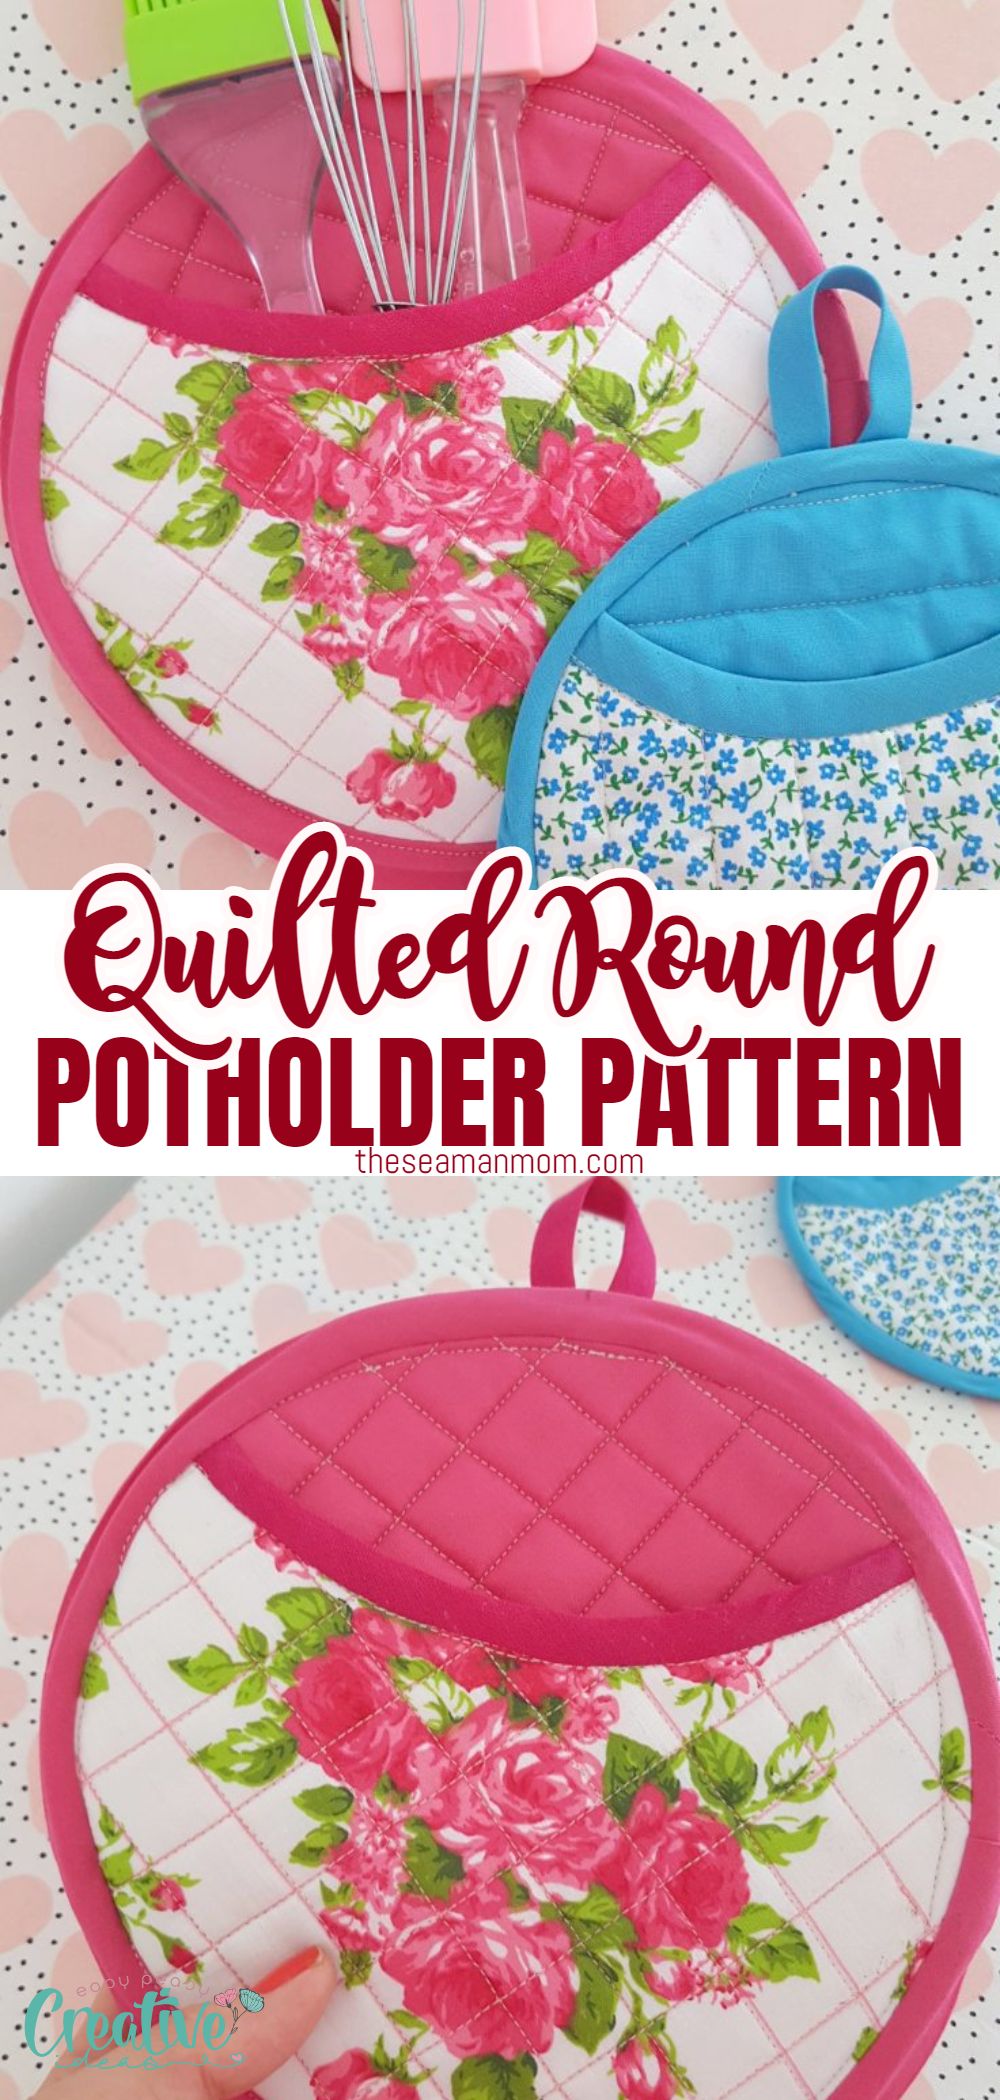 Making potholders is fun and easy! Learn how to make some simple but stunning round quilted pot holders with this easy to follow tutorial! Great gift ideas for holidays but work wonders for every day use in your personal kitchen! via @petroneagu